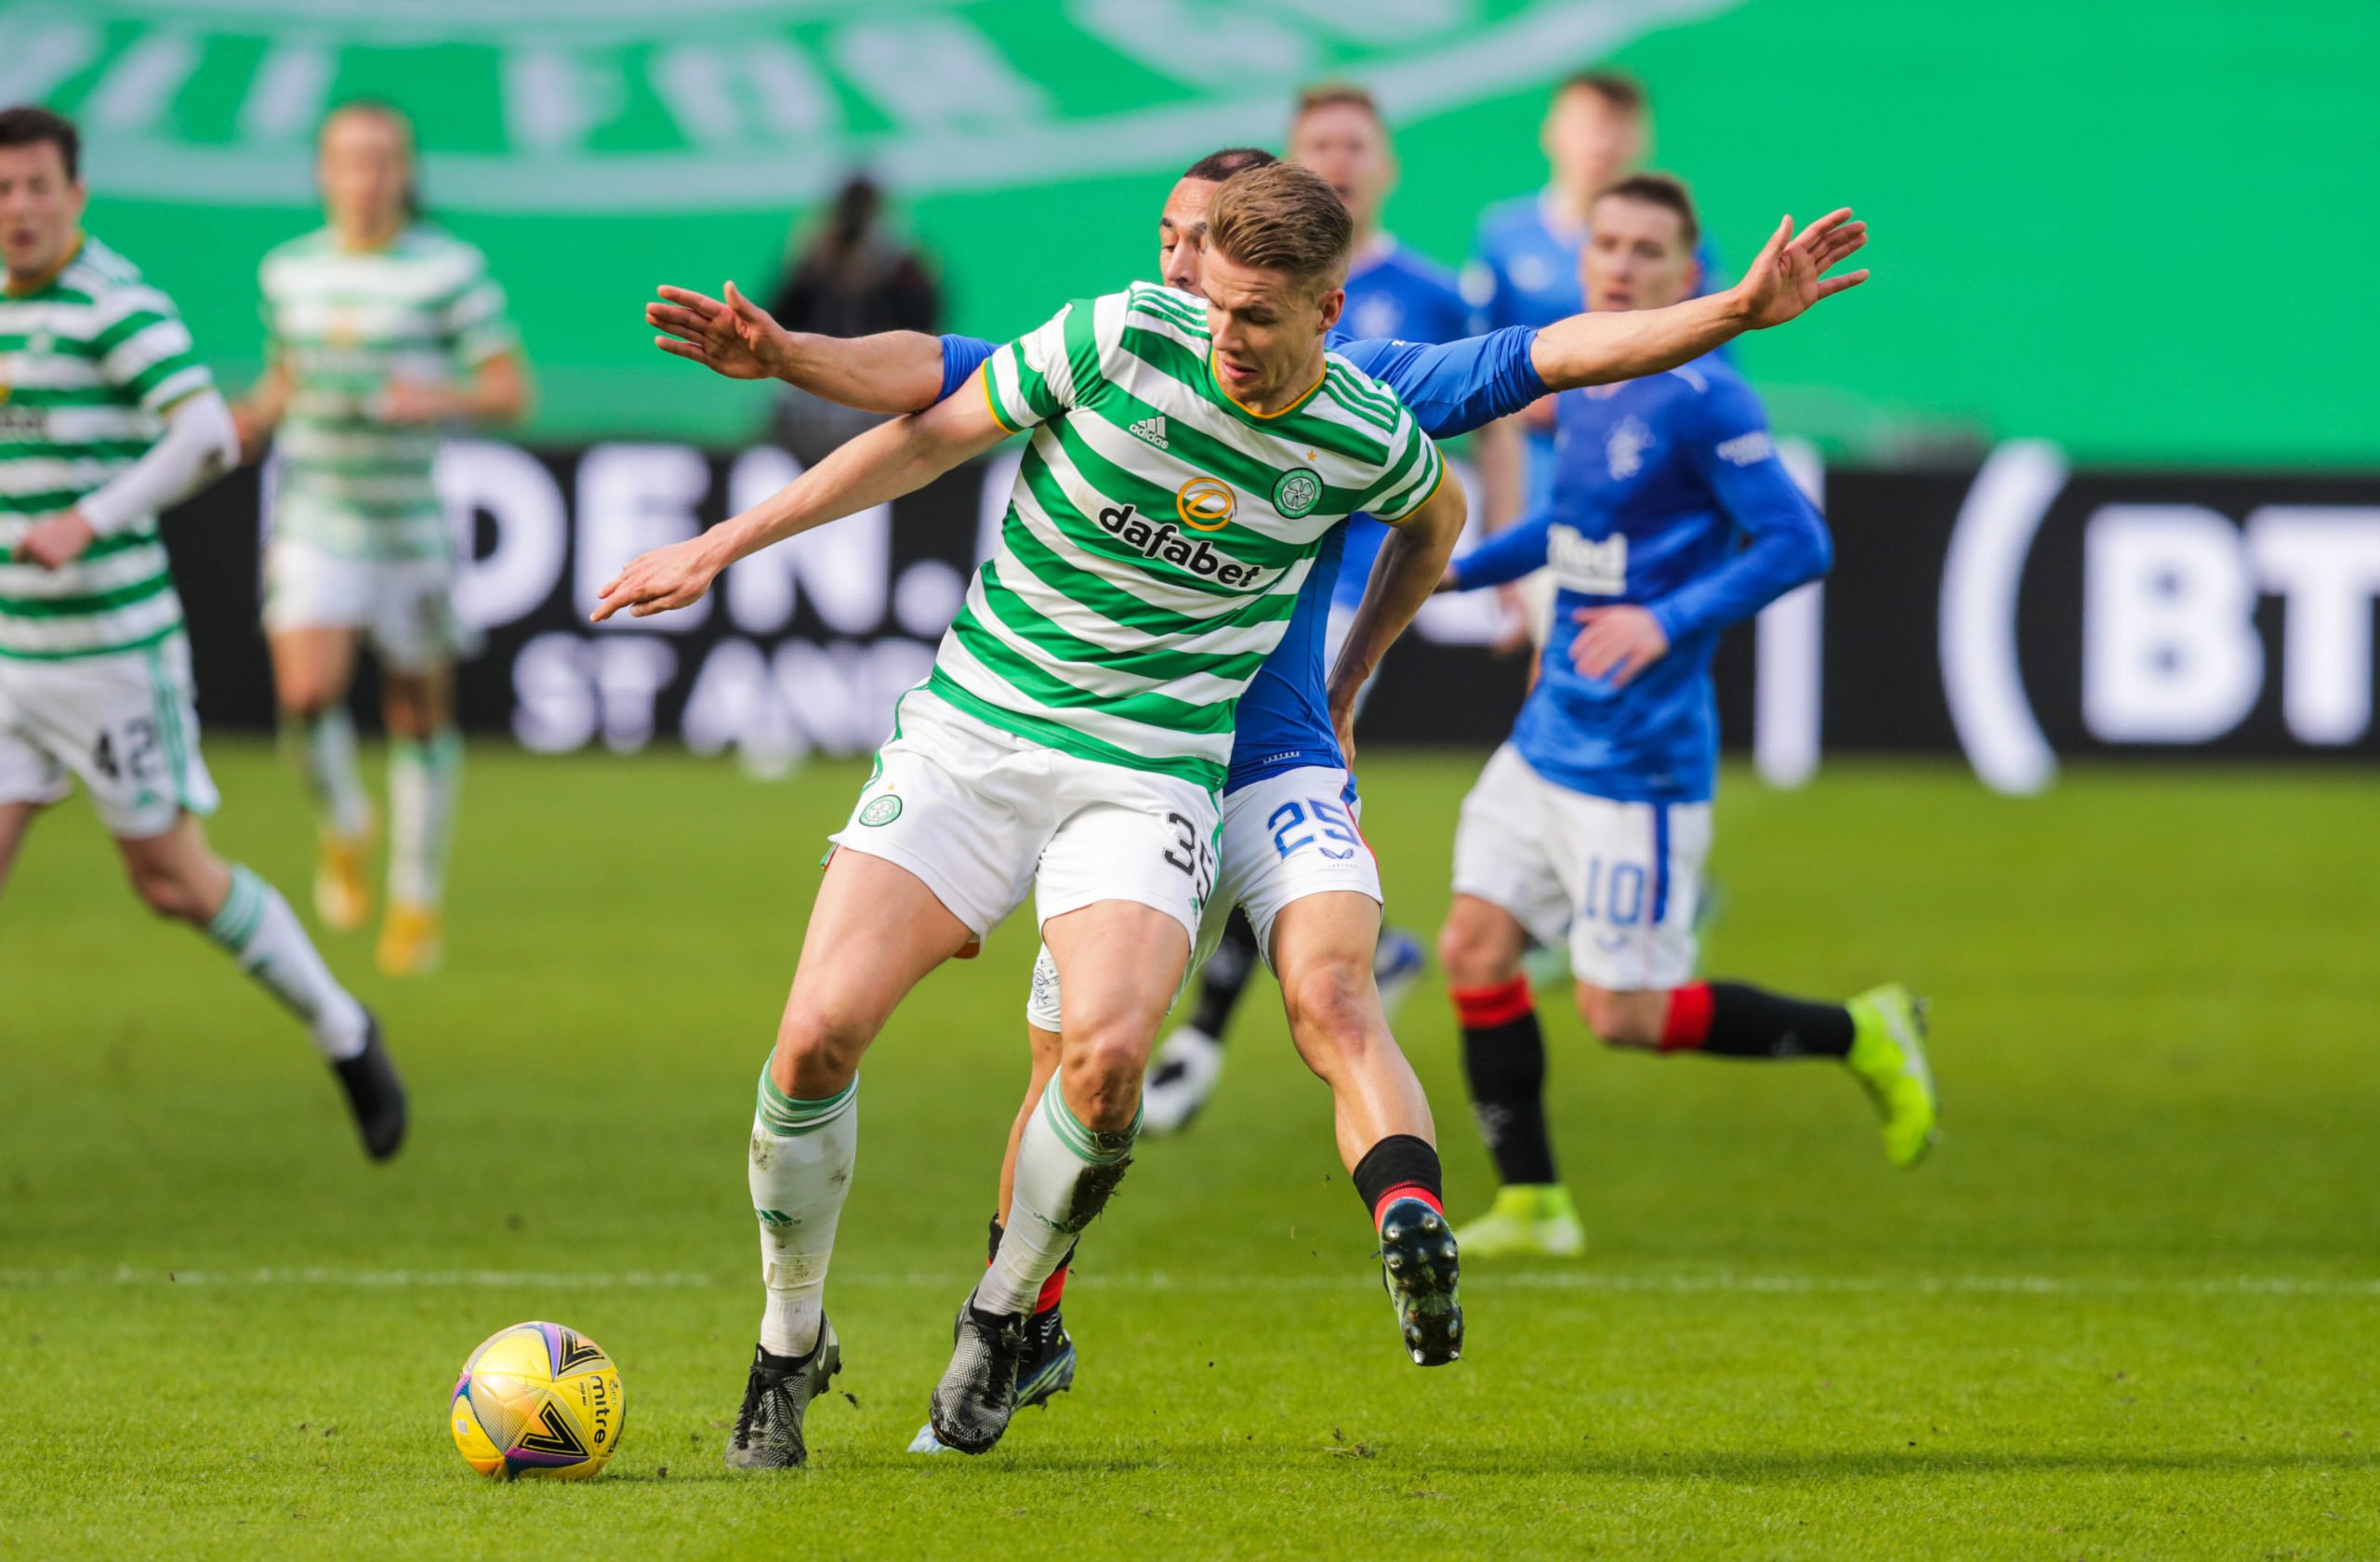 Newcastle United leading the chase to recruit Ajer who is seen in the picture